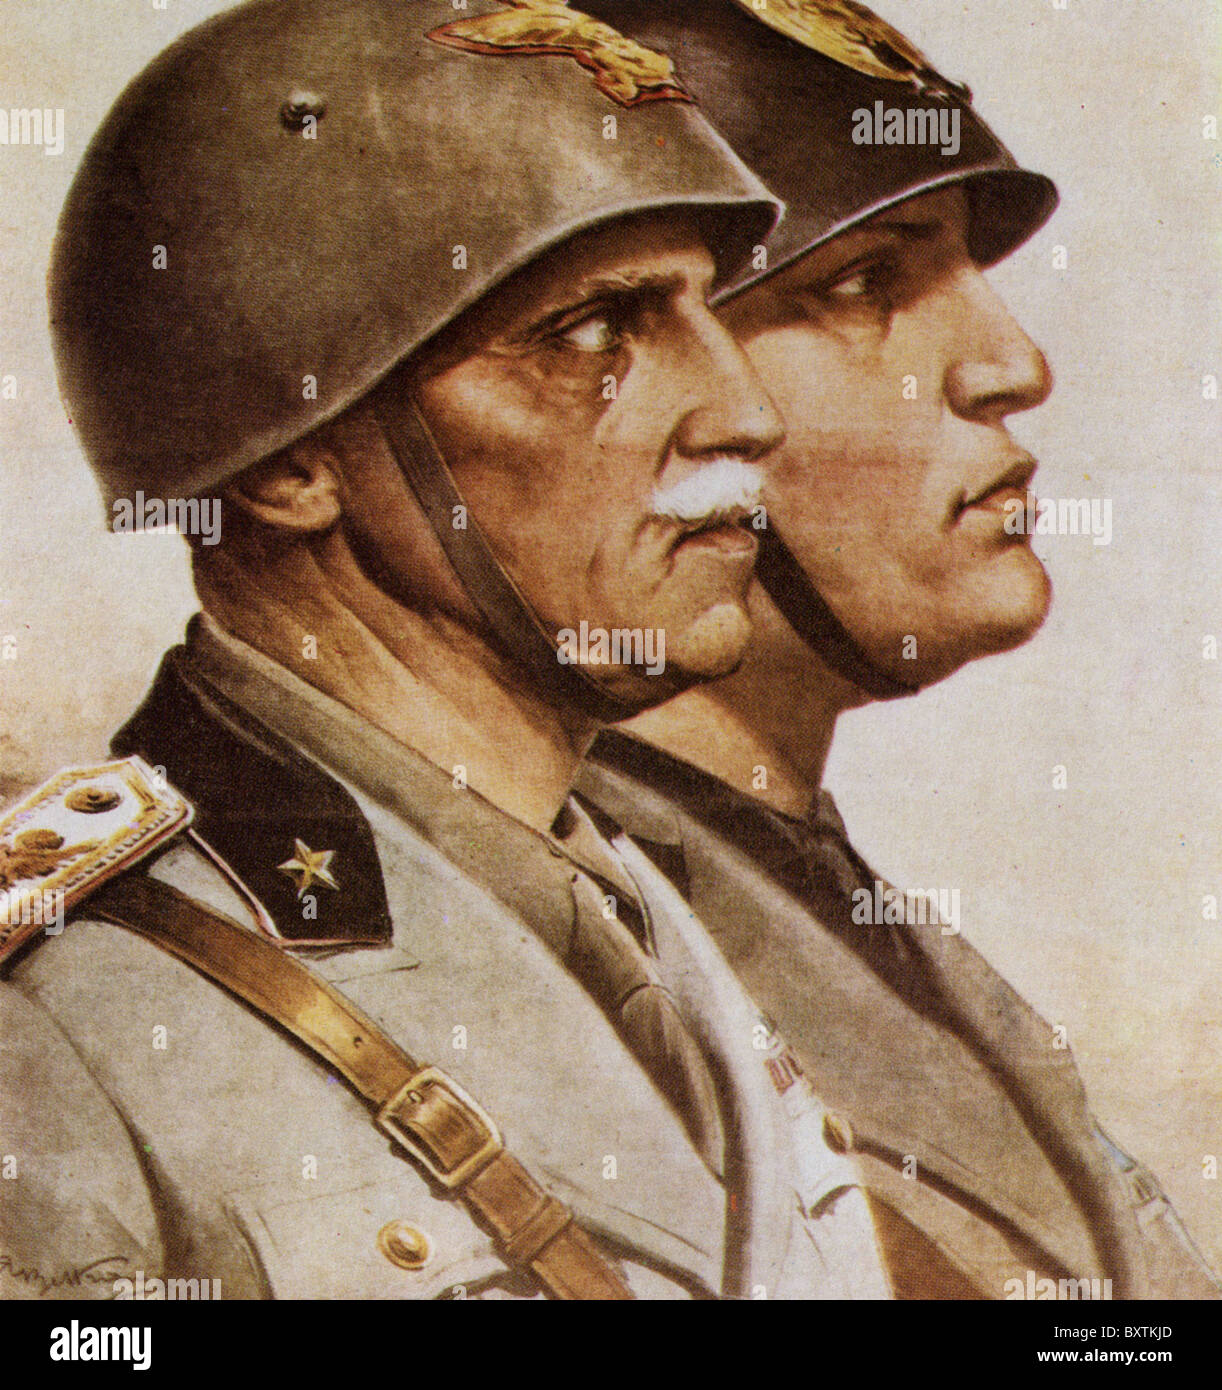 KING VICTOR EMMANUEL III of Italy in a propaganda poster next to Benito Mussolini at right about  1942 Stock Photo